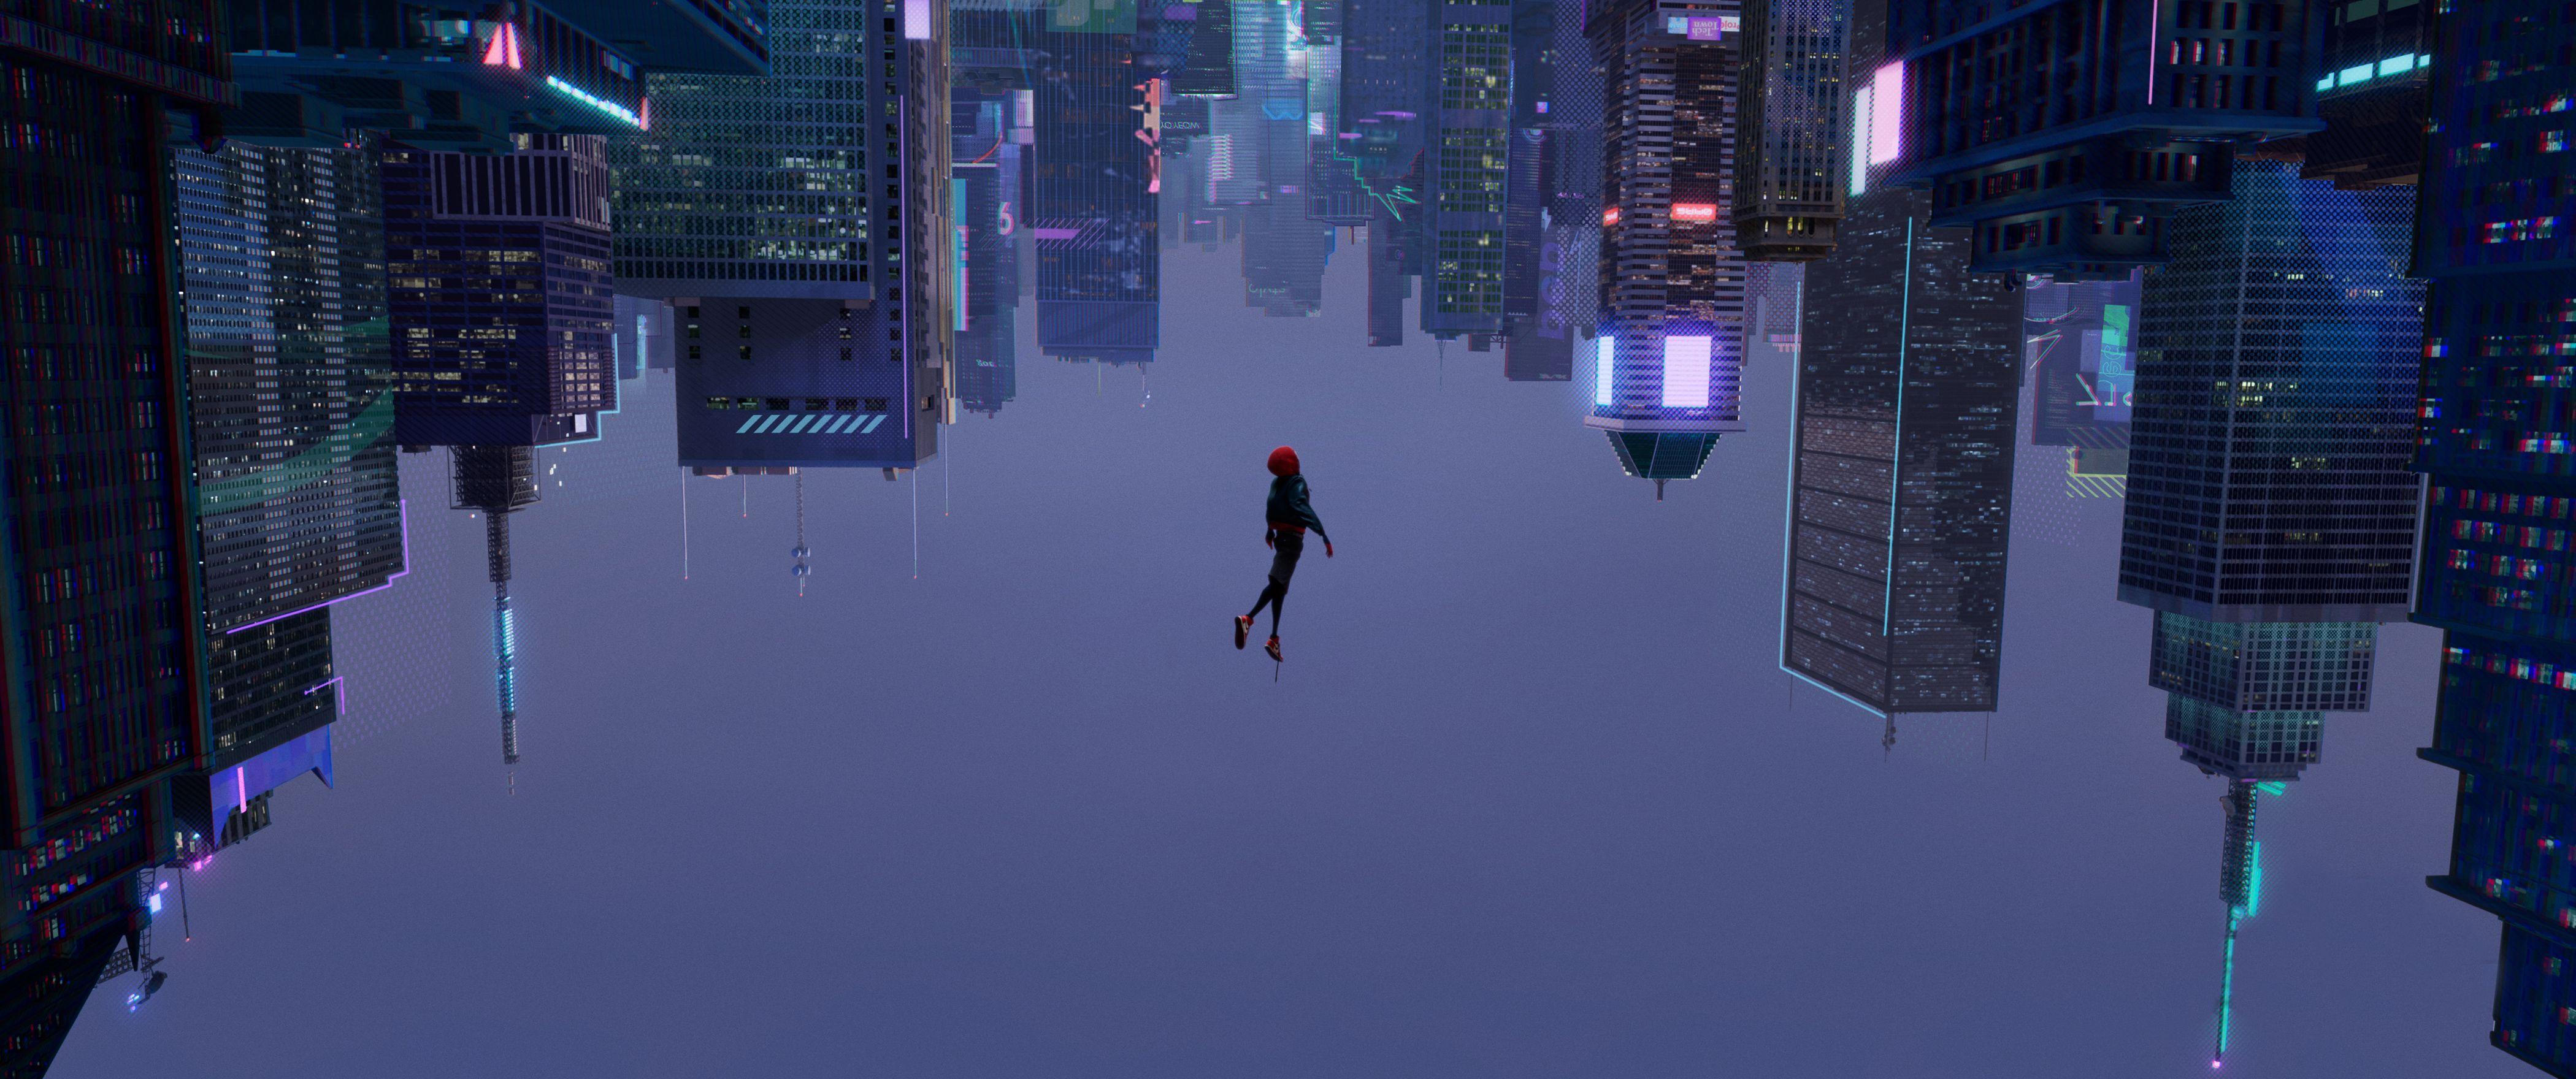 Spider-Man: Into The Spider-Verse 4k Wallpapers - Top Free Spider-Man